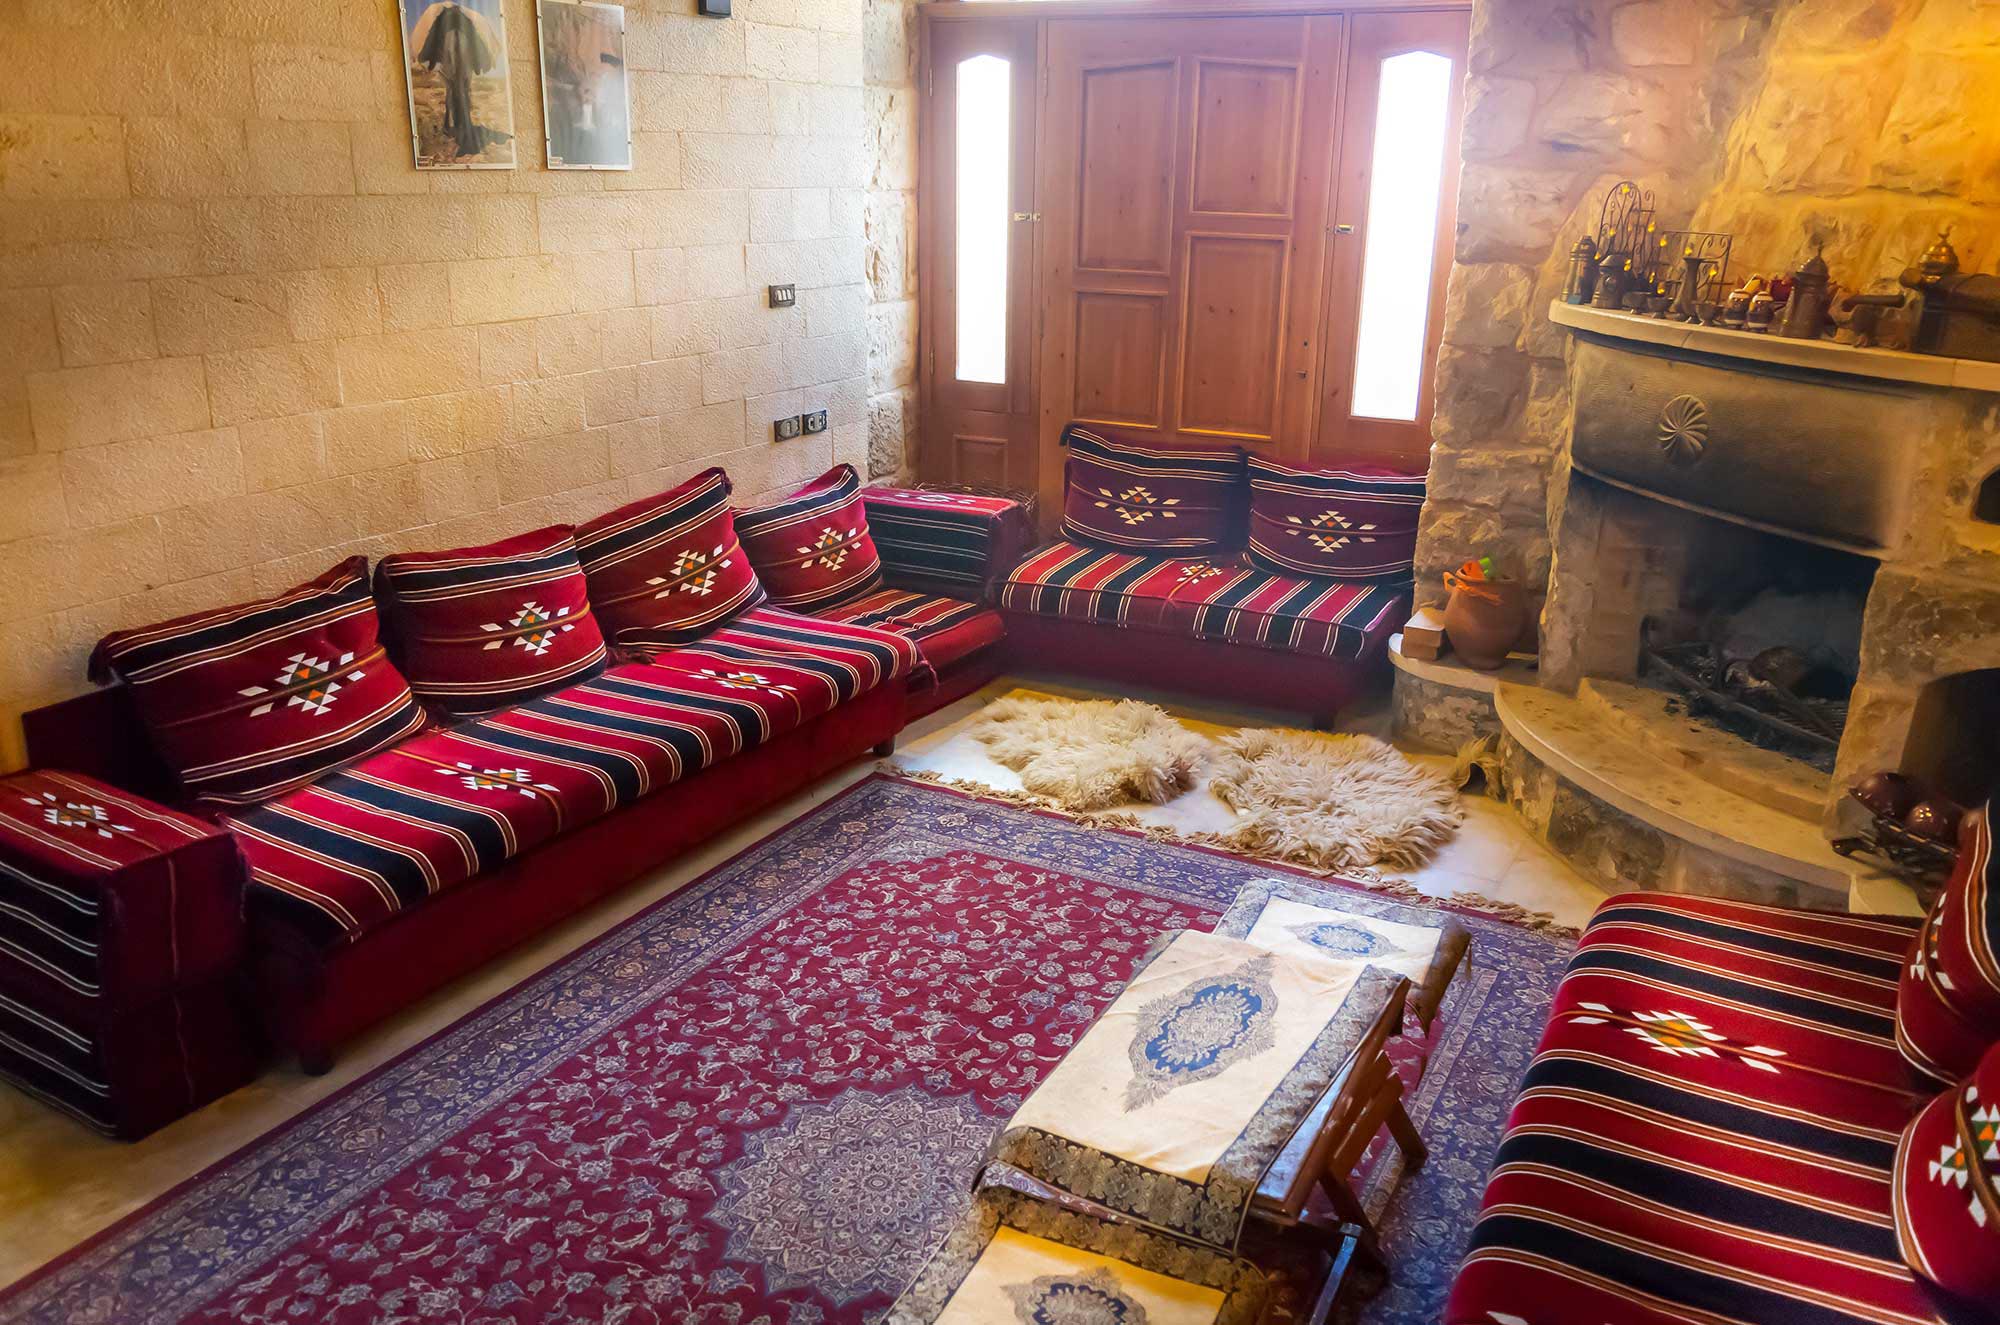 The "diwan," a traditional Arab living room inside the guesthouse.